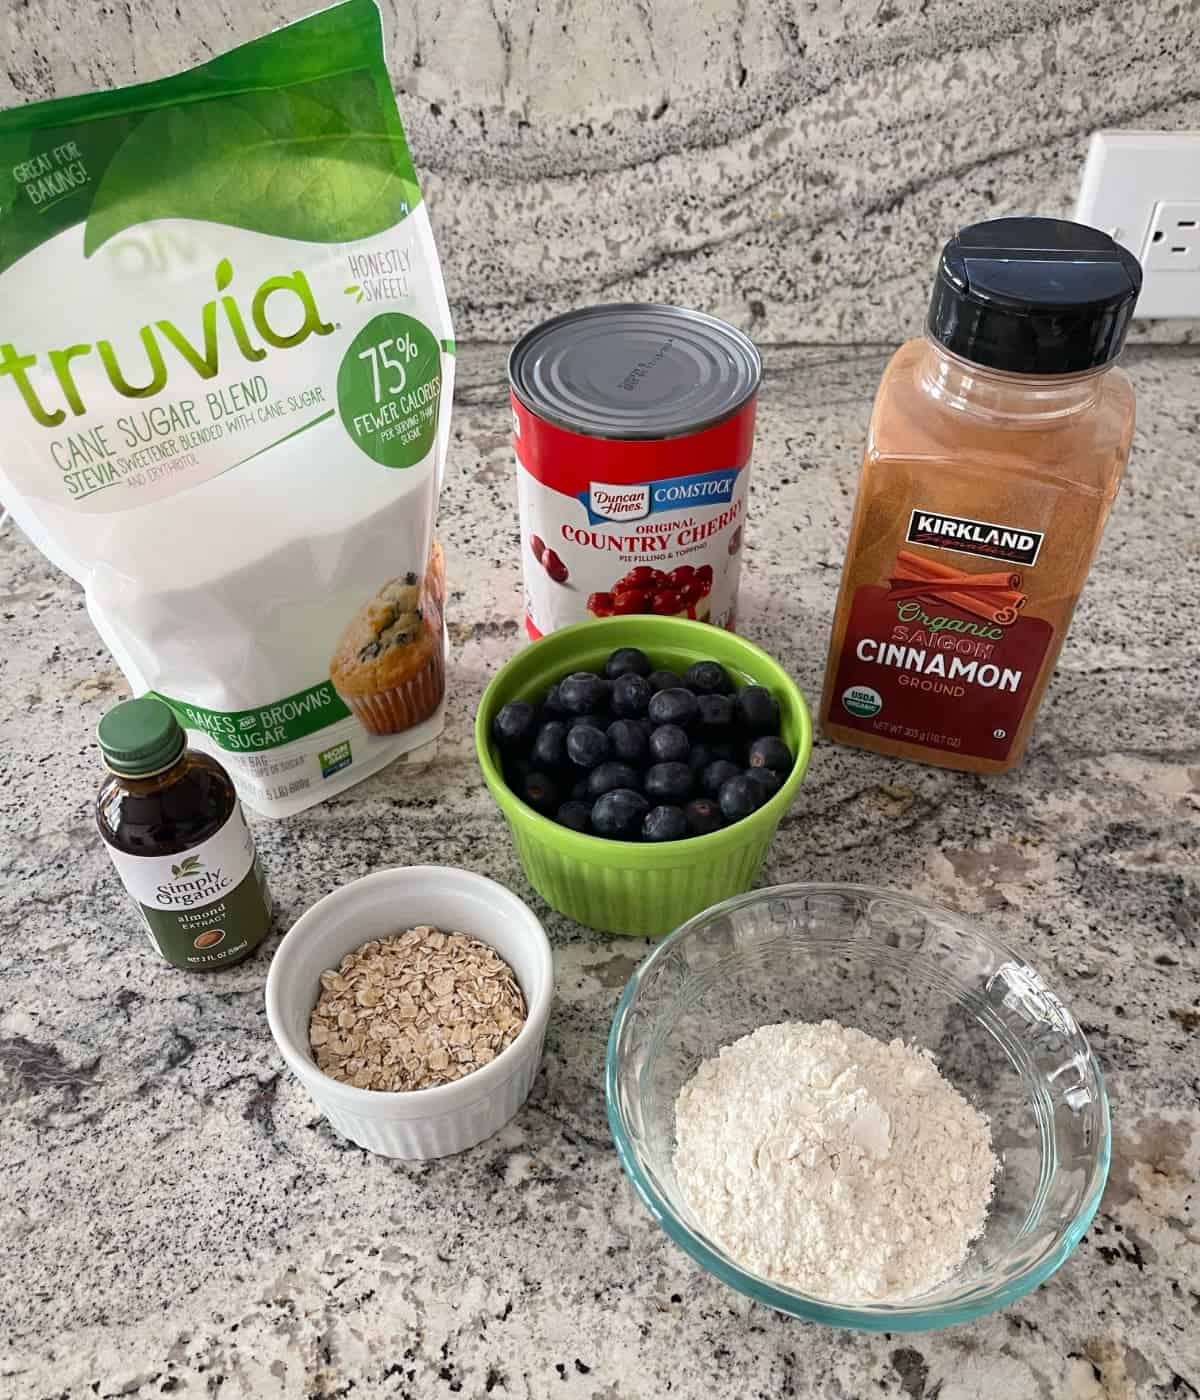 Ingredients including Truvia Baking Blend, can of cherry pie filling, cinnamon, almond extract, fresh blueberries, quick oats and all-purpose flour.